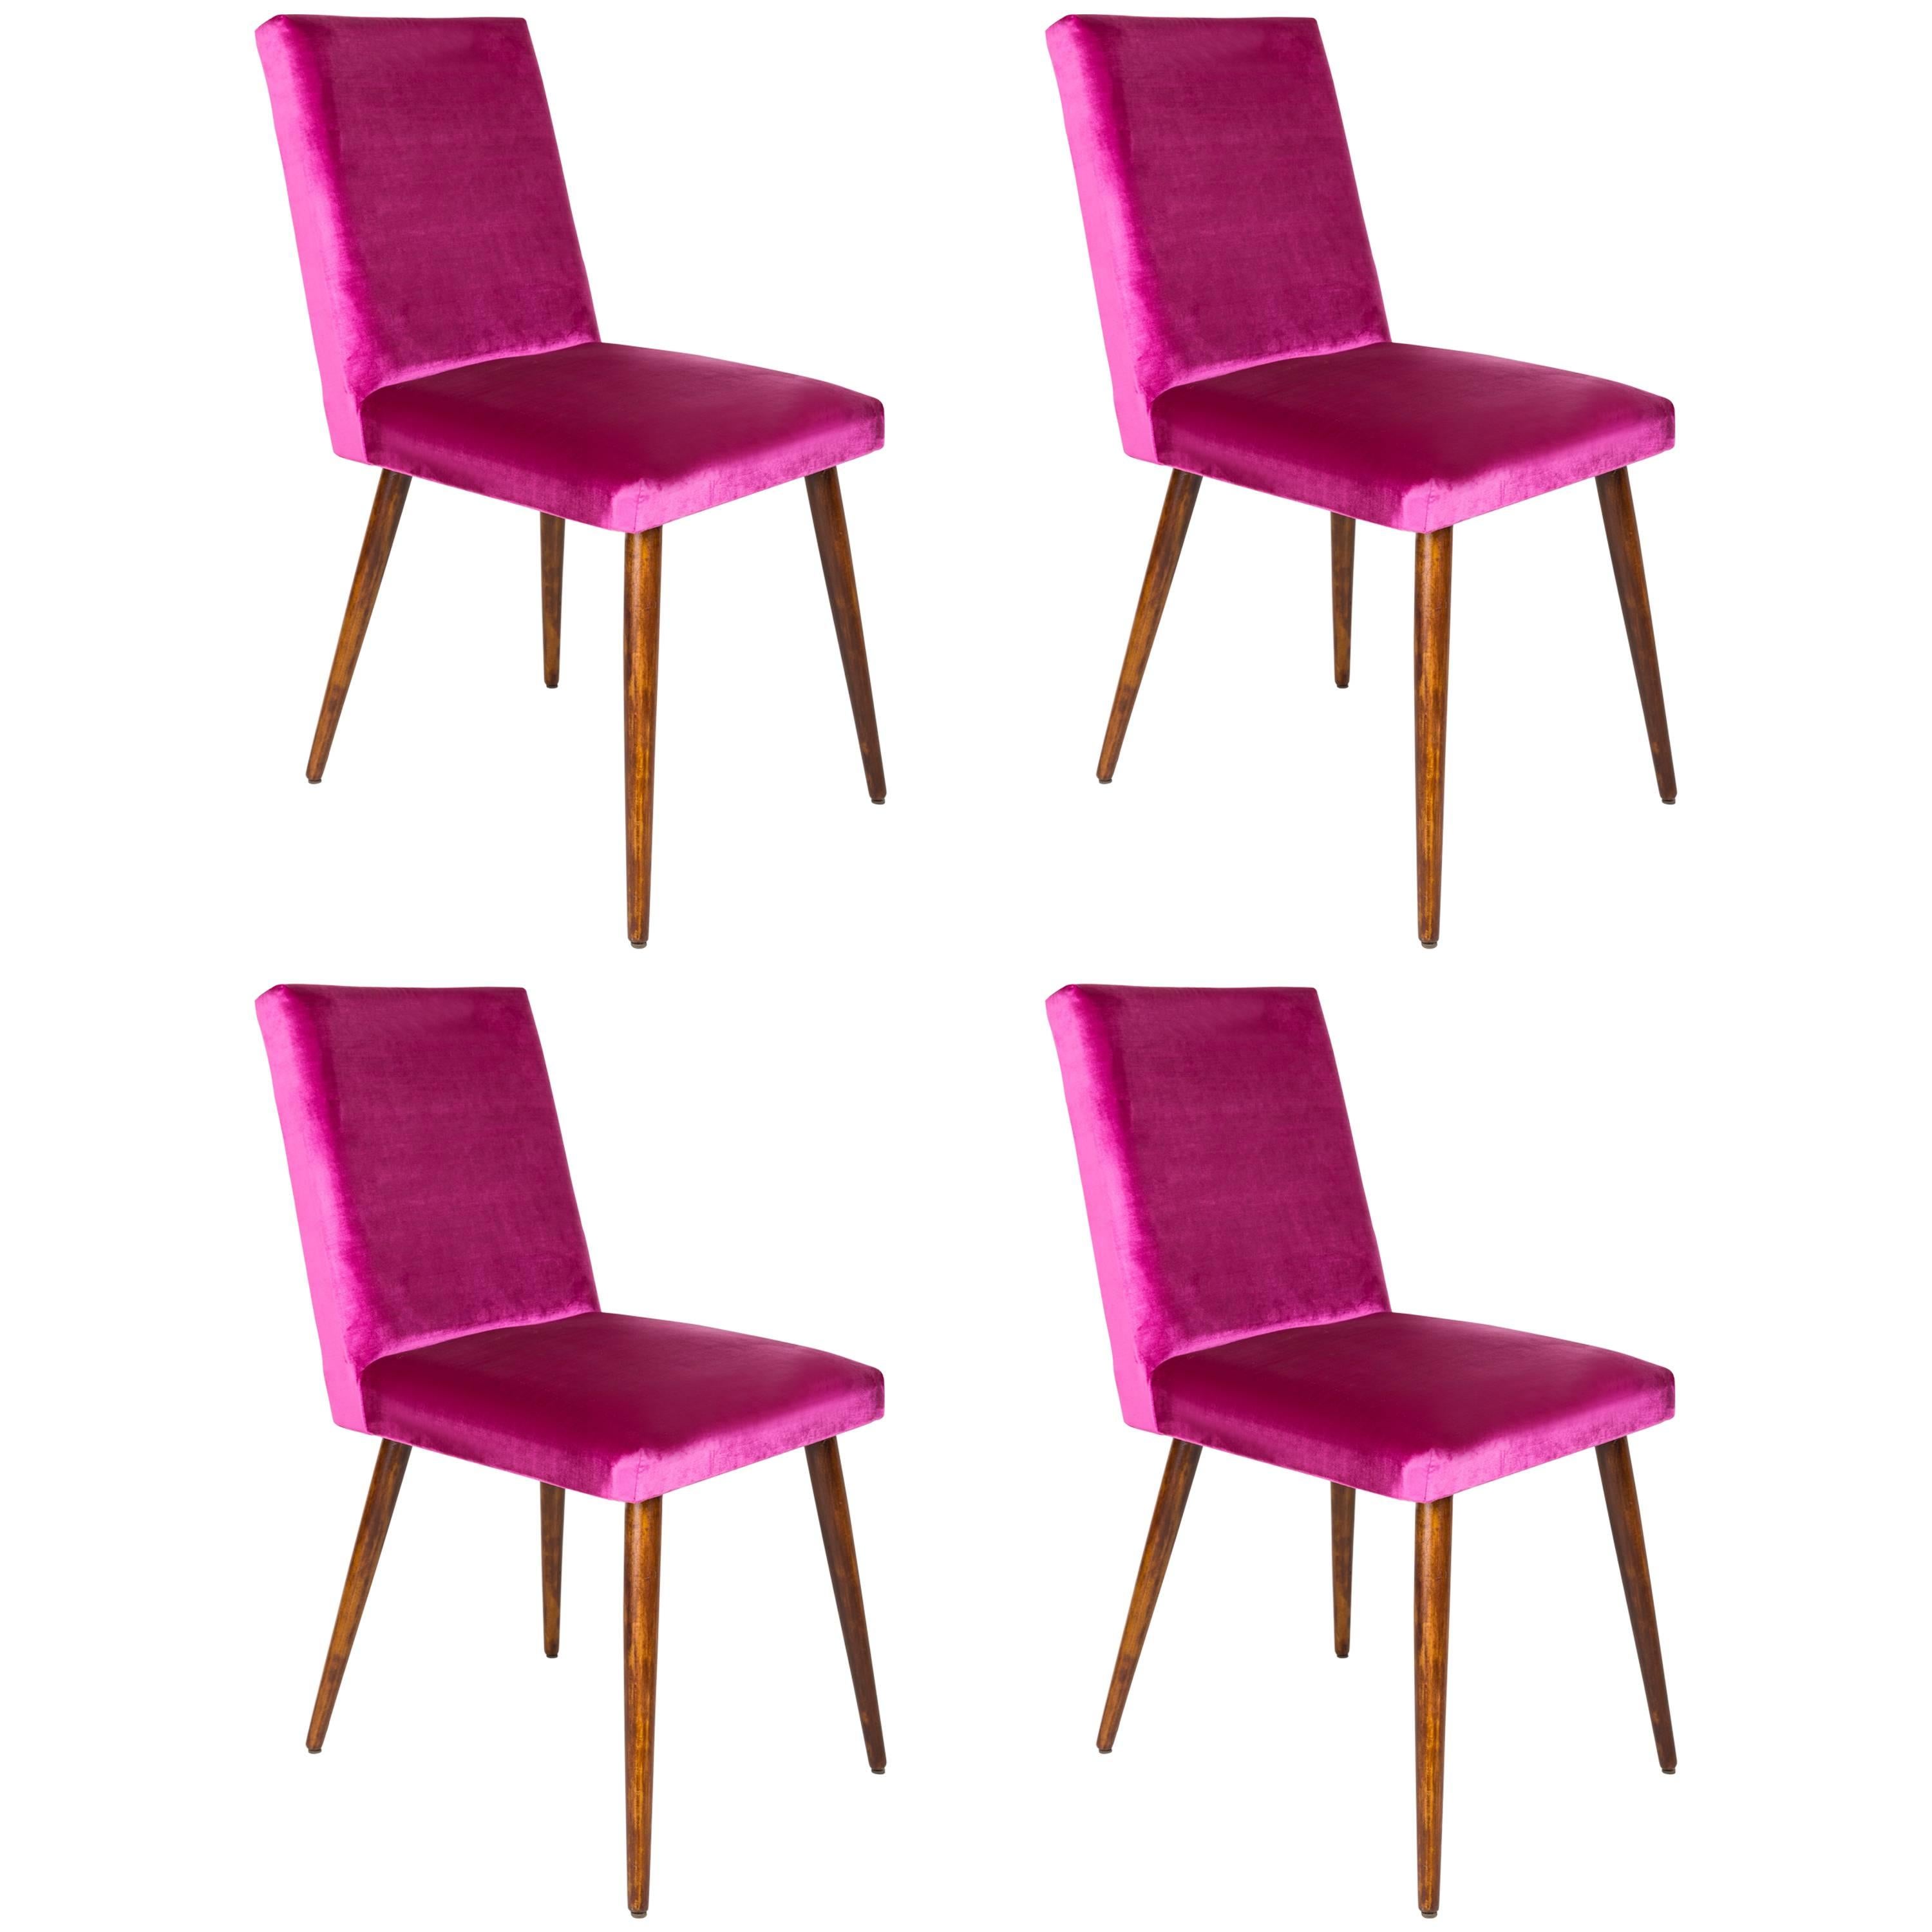 Set of Four 20th Century Magenta Pink Velvet Chairs, 1960s